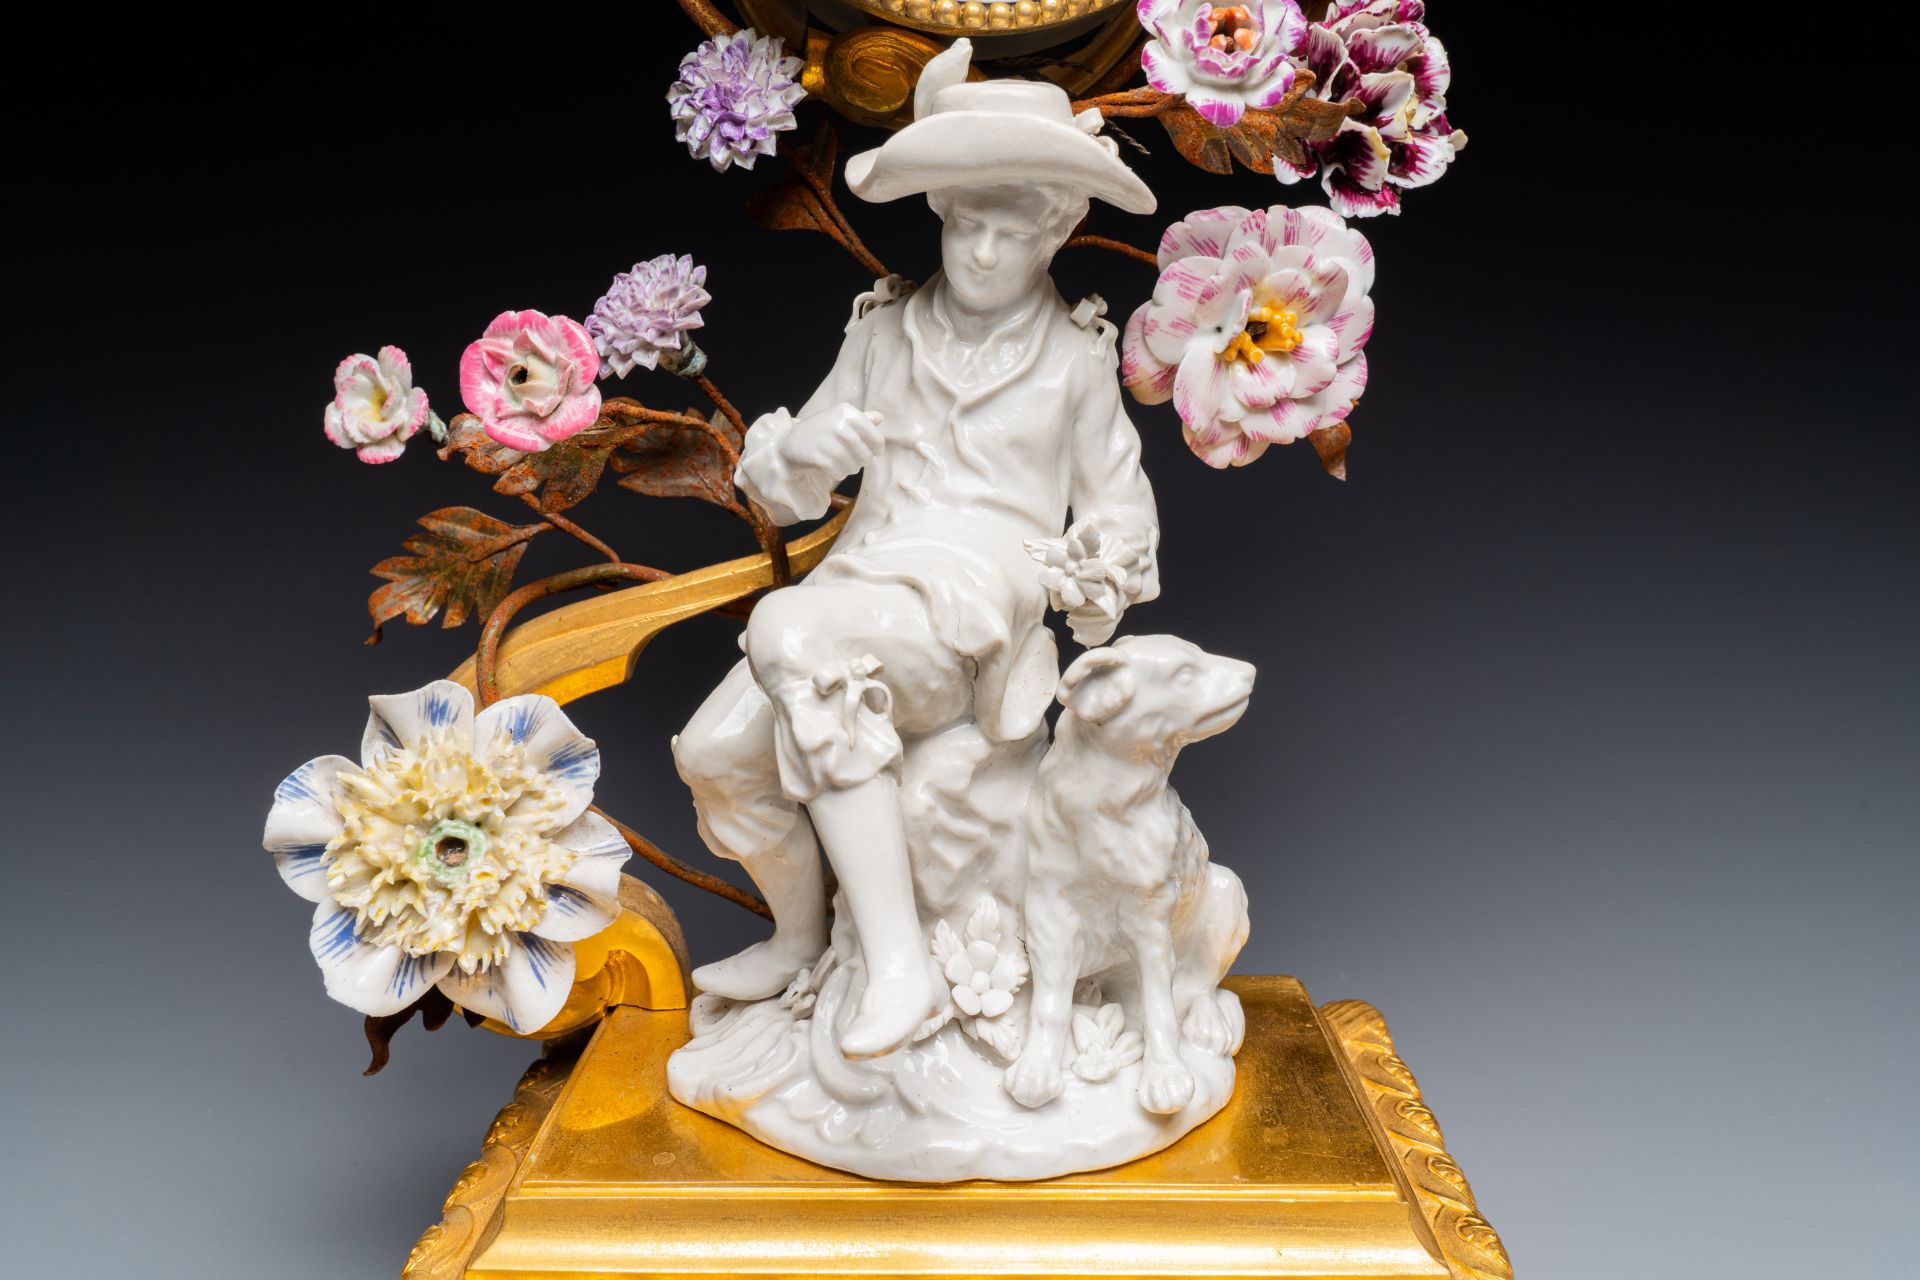 A French ormolu-mounted porcelain mantel clock, 18/19th C. - Image 22 of 28